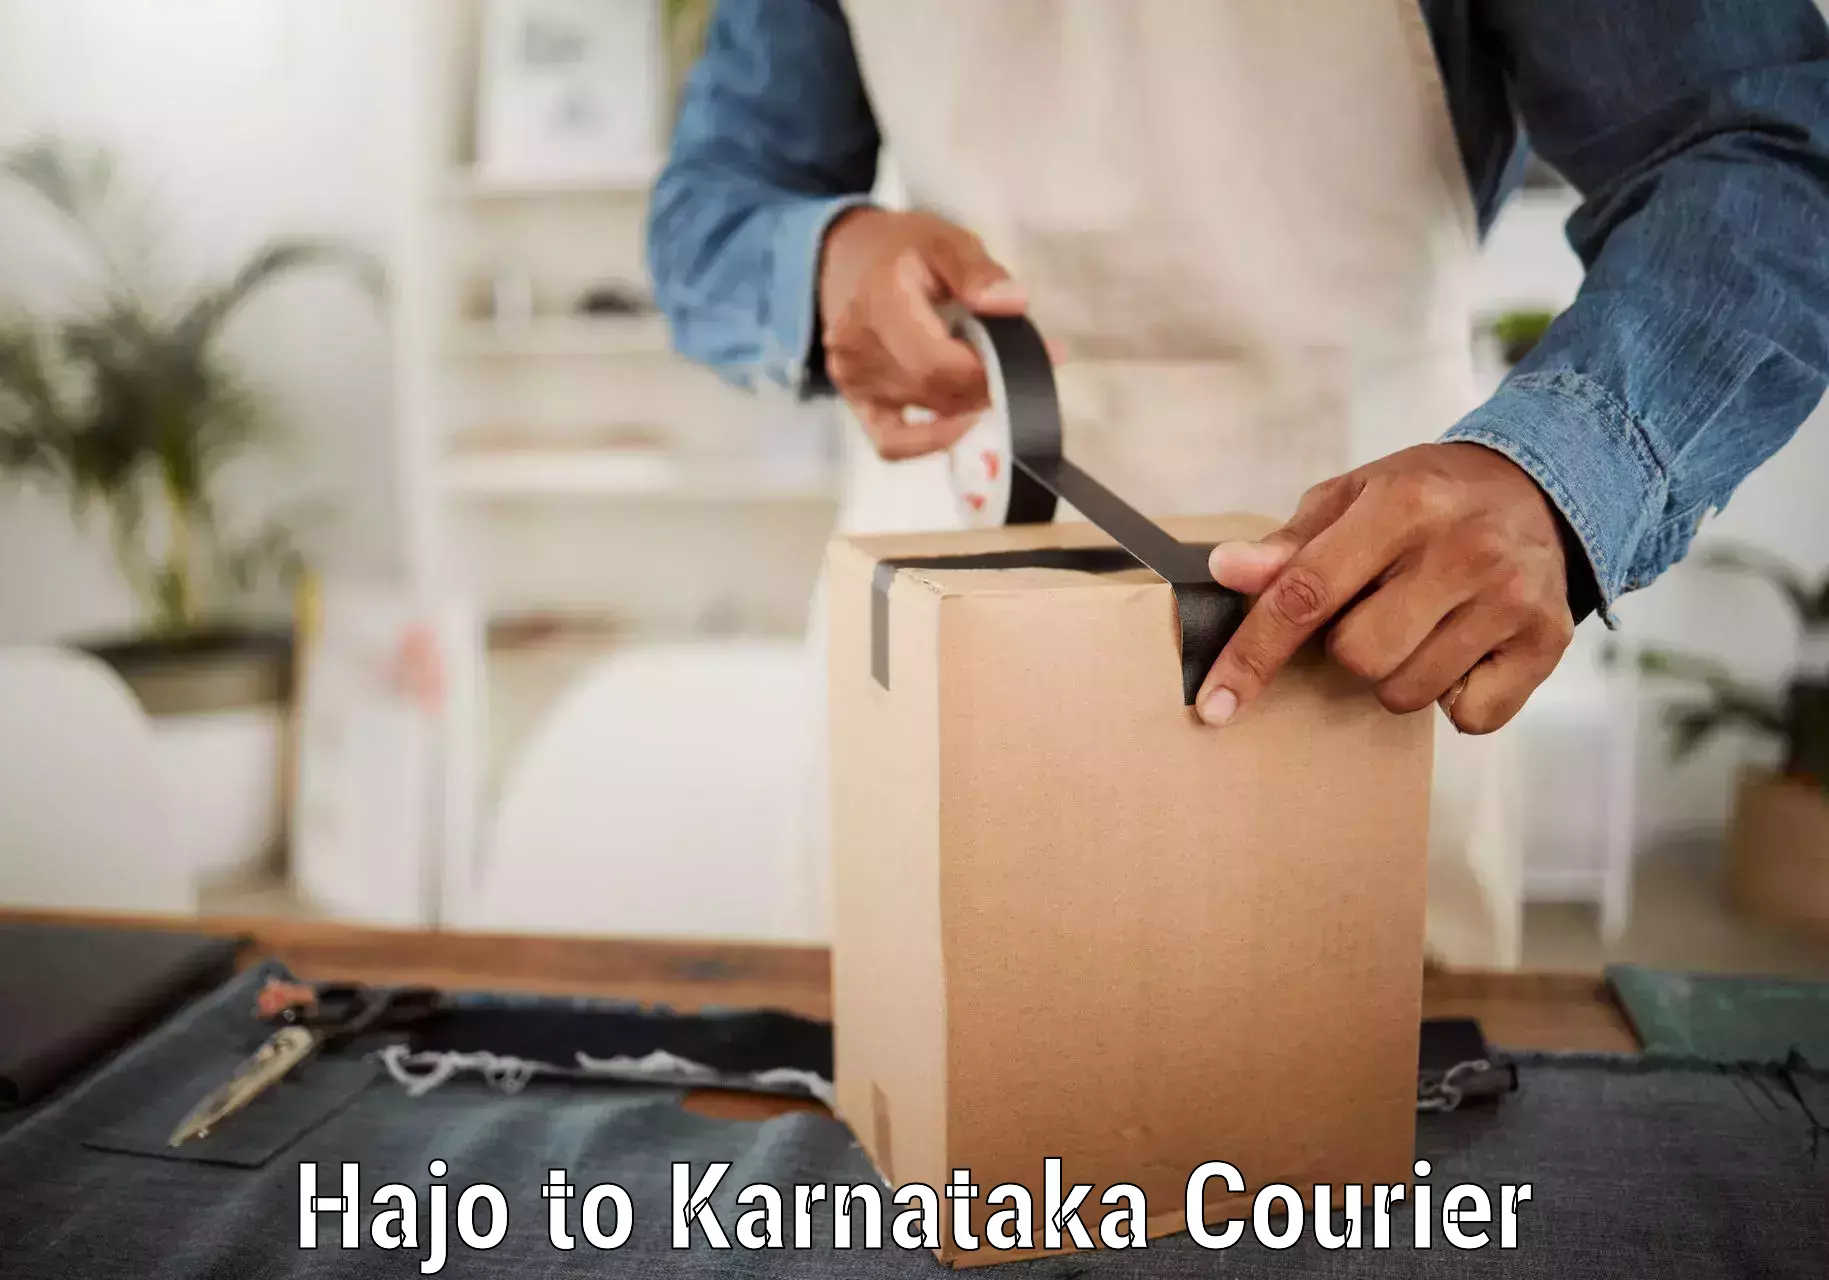 Flexible delivery schedules in Hajo to Karnataka